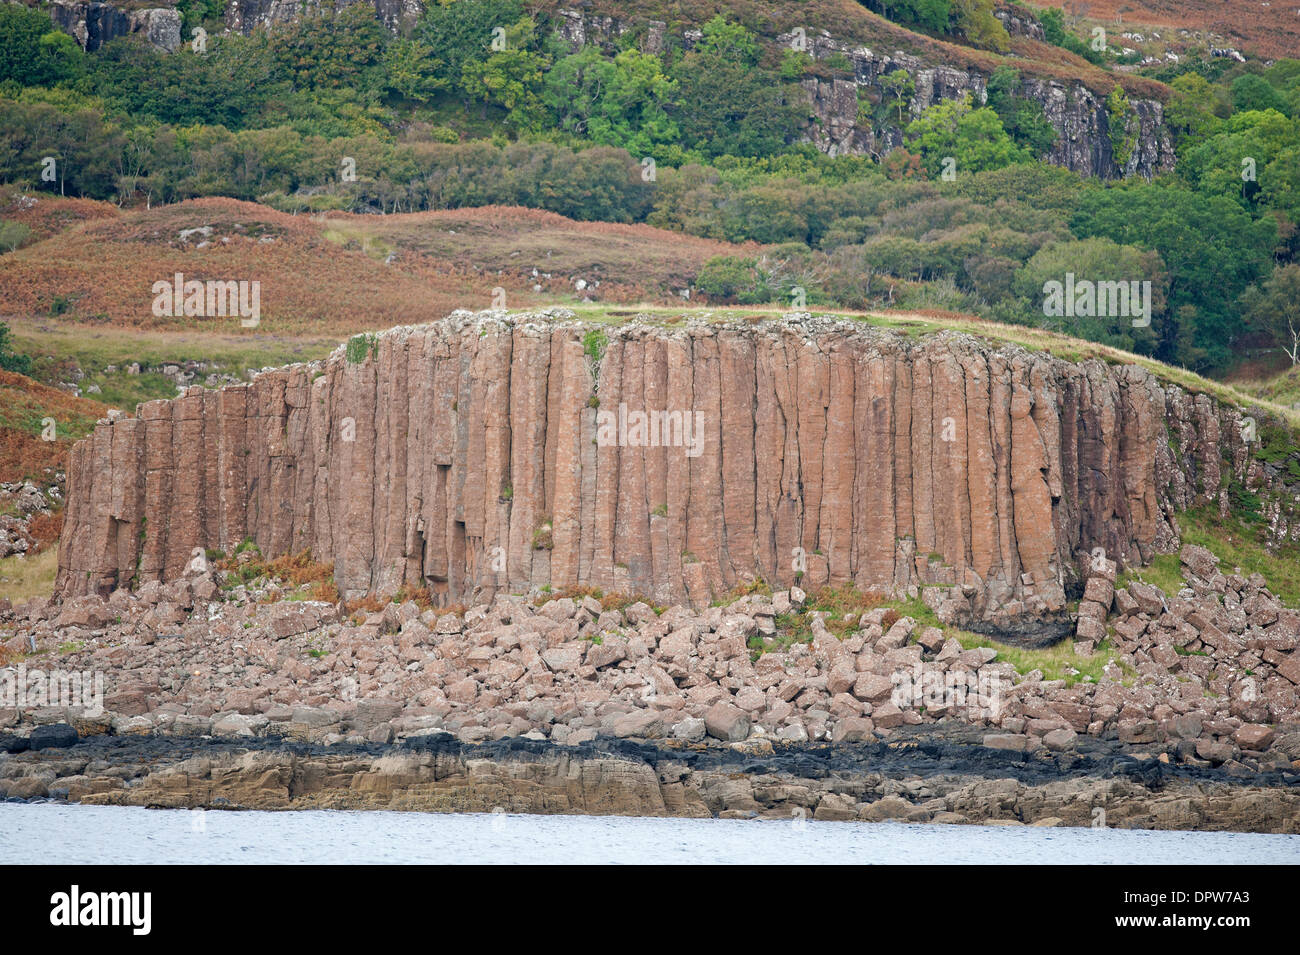 Basalt rock face on the shores of Loch Na Keal, Isle of Mull. Argyll. Scotland.  SCO 9238. Stock Photo